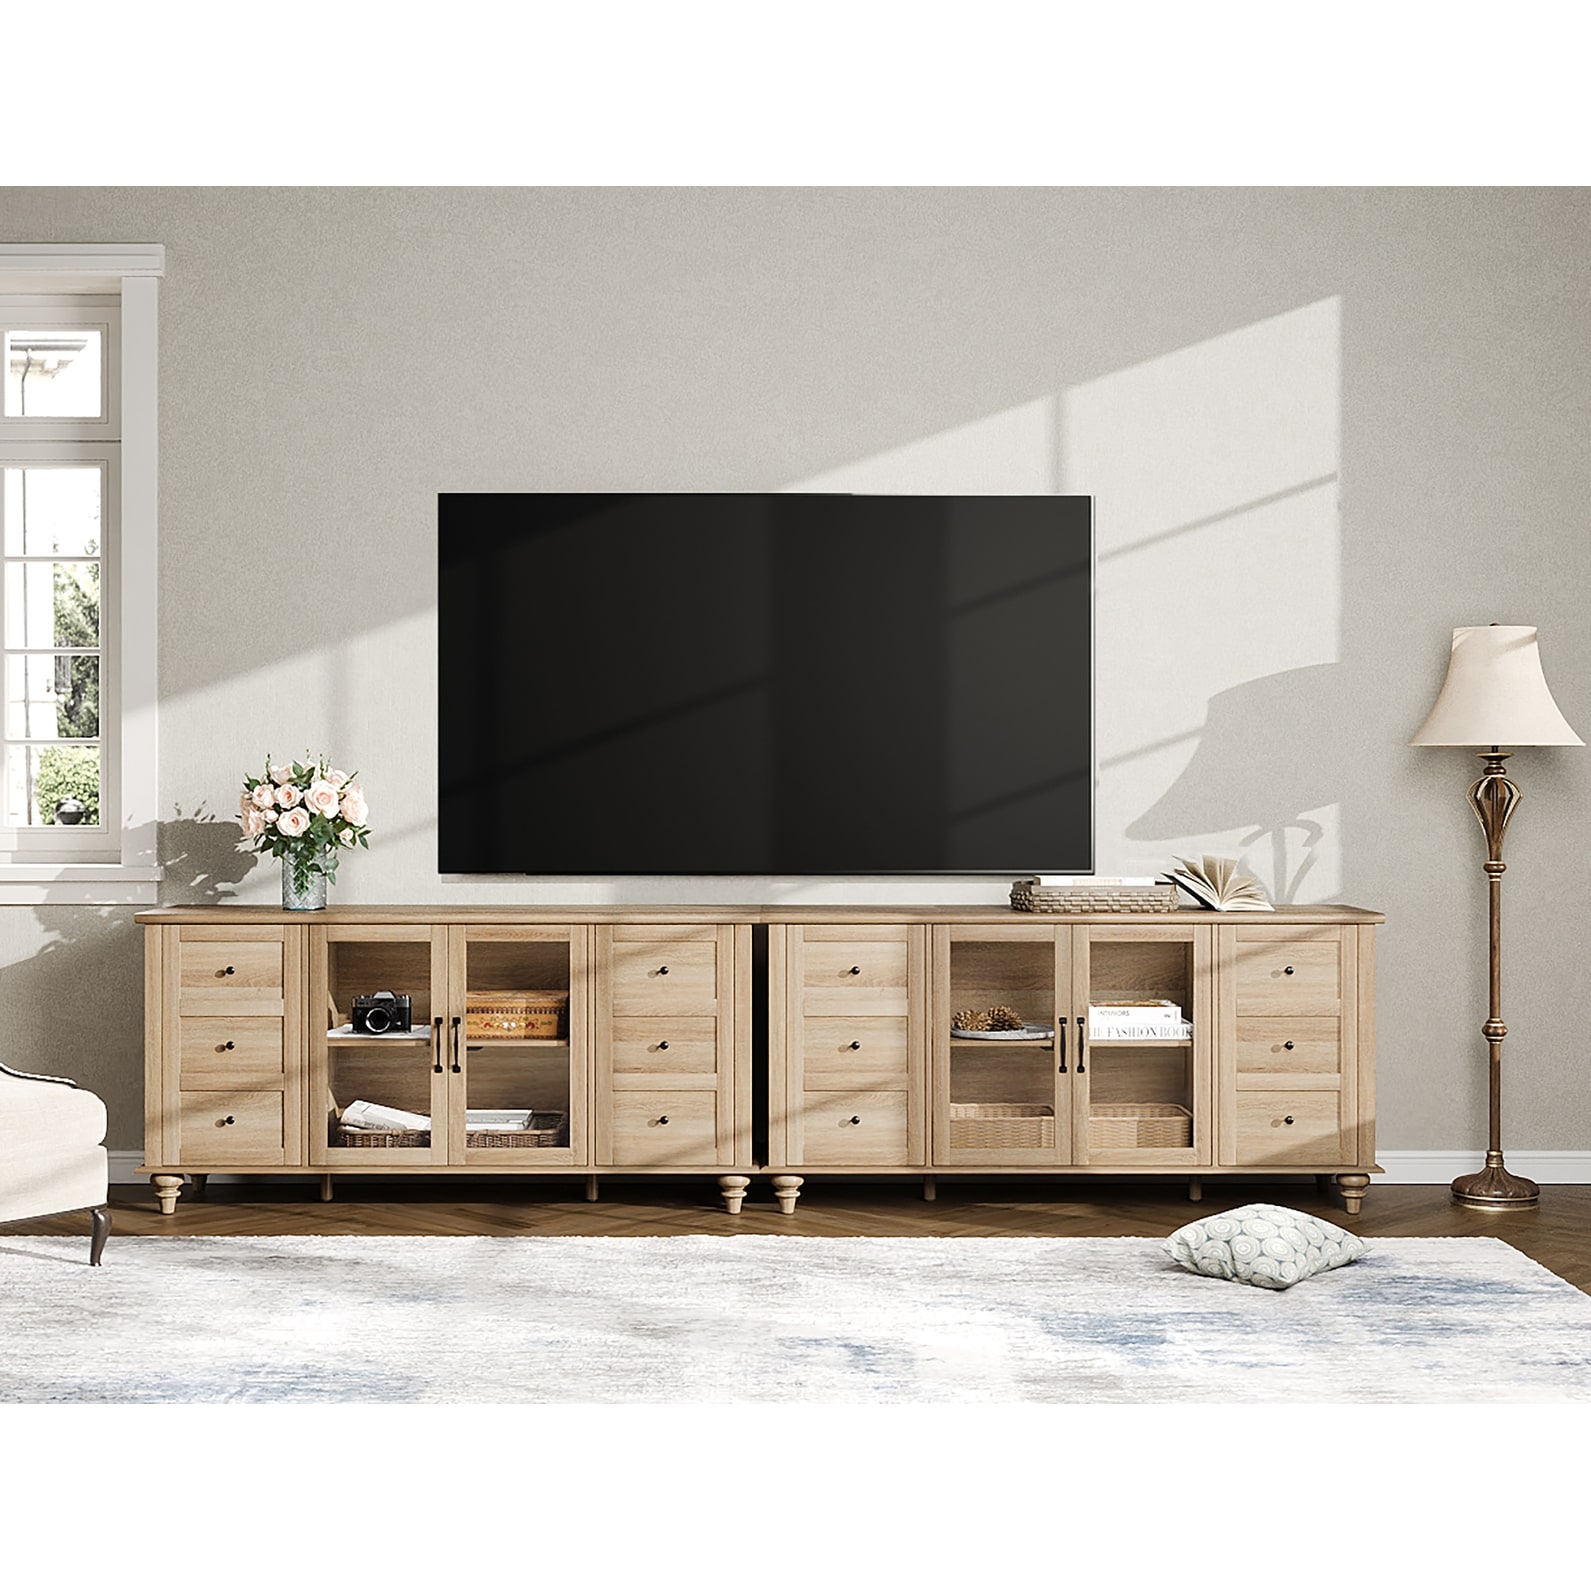 WAMPAT Modern TV Stand for up to 100 inch 2 in 1 Entertainment Center